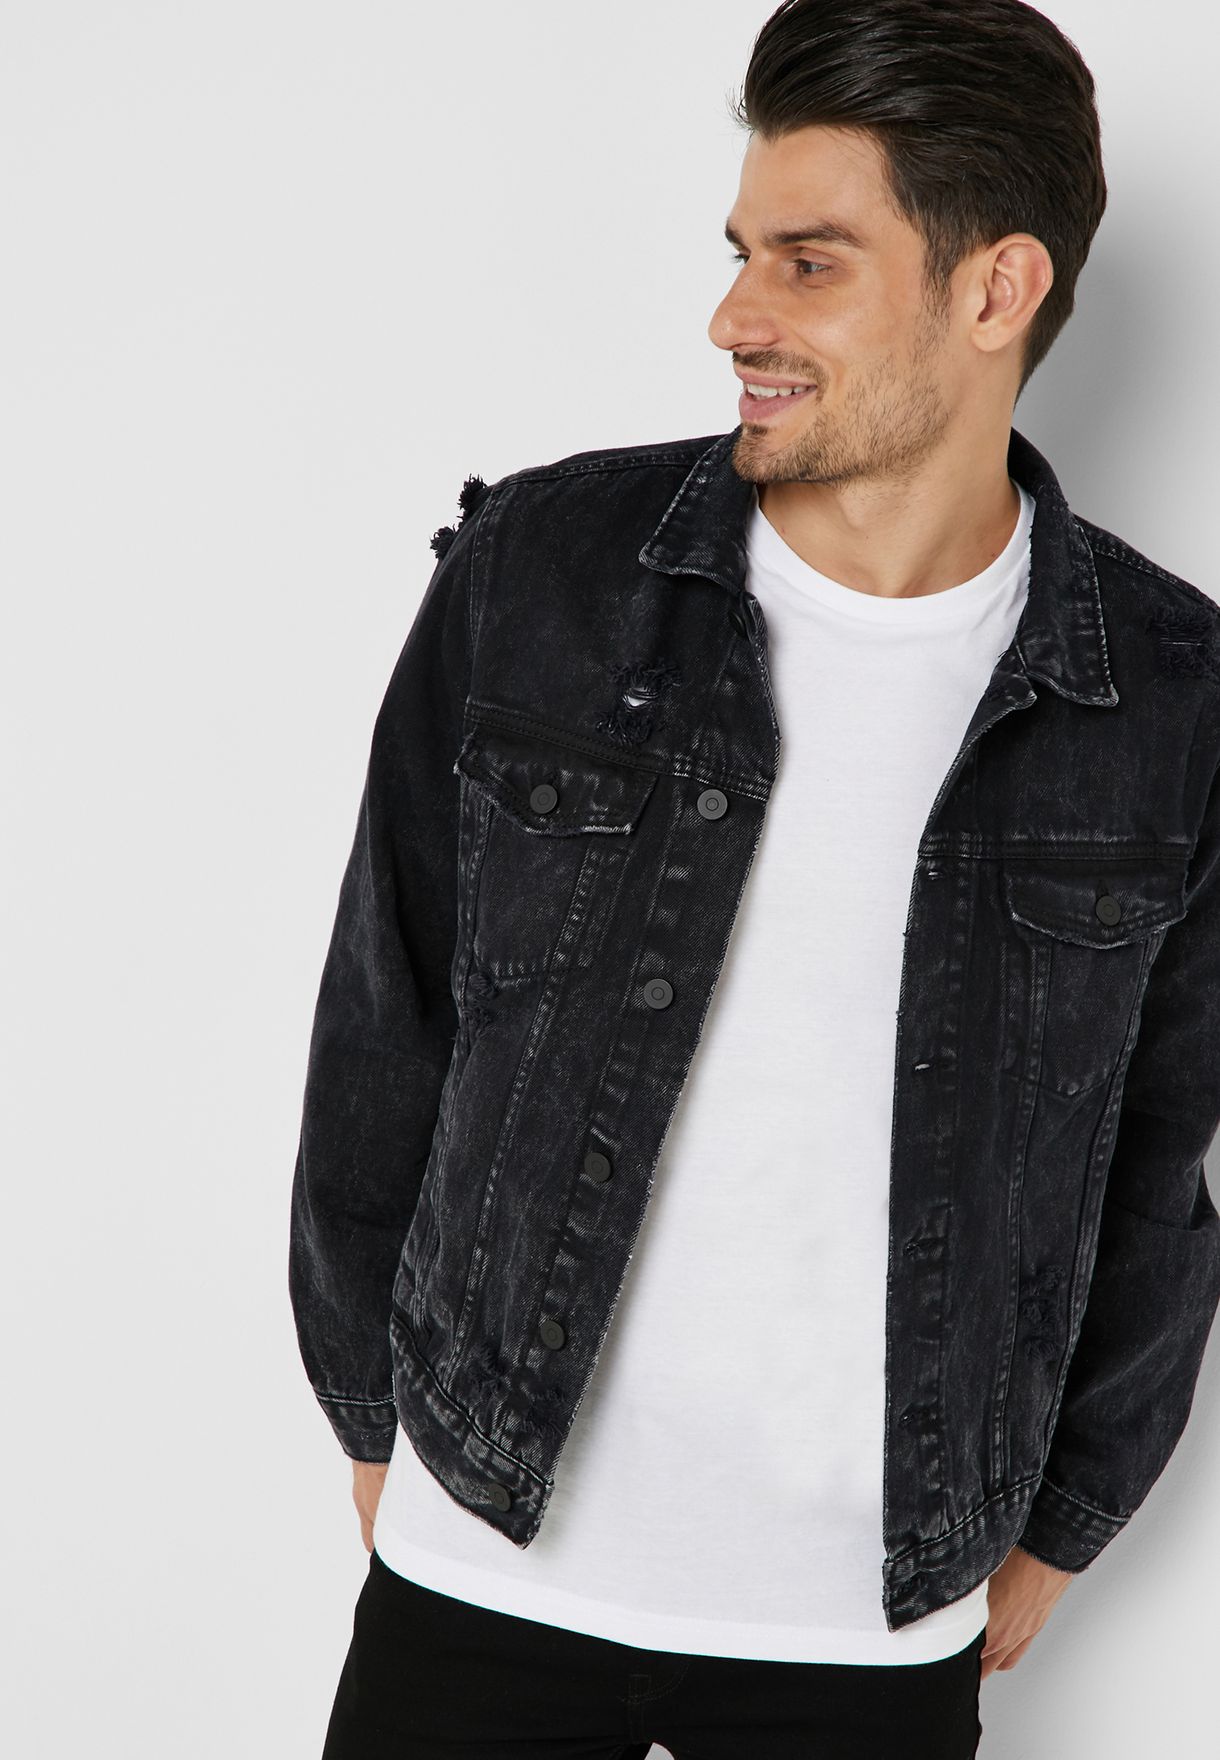 forever 21 mens jean jackets